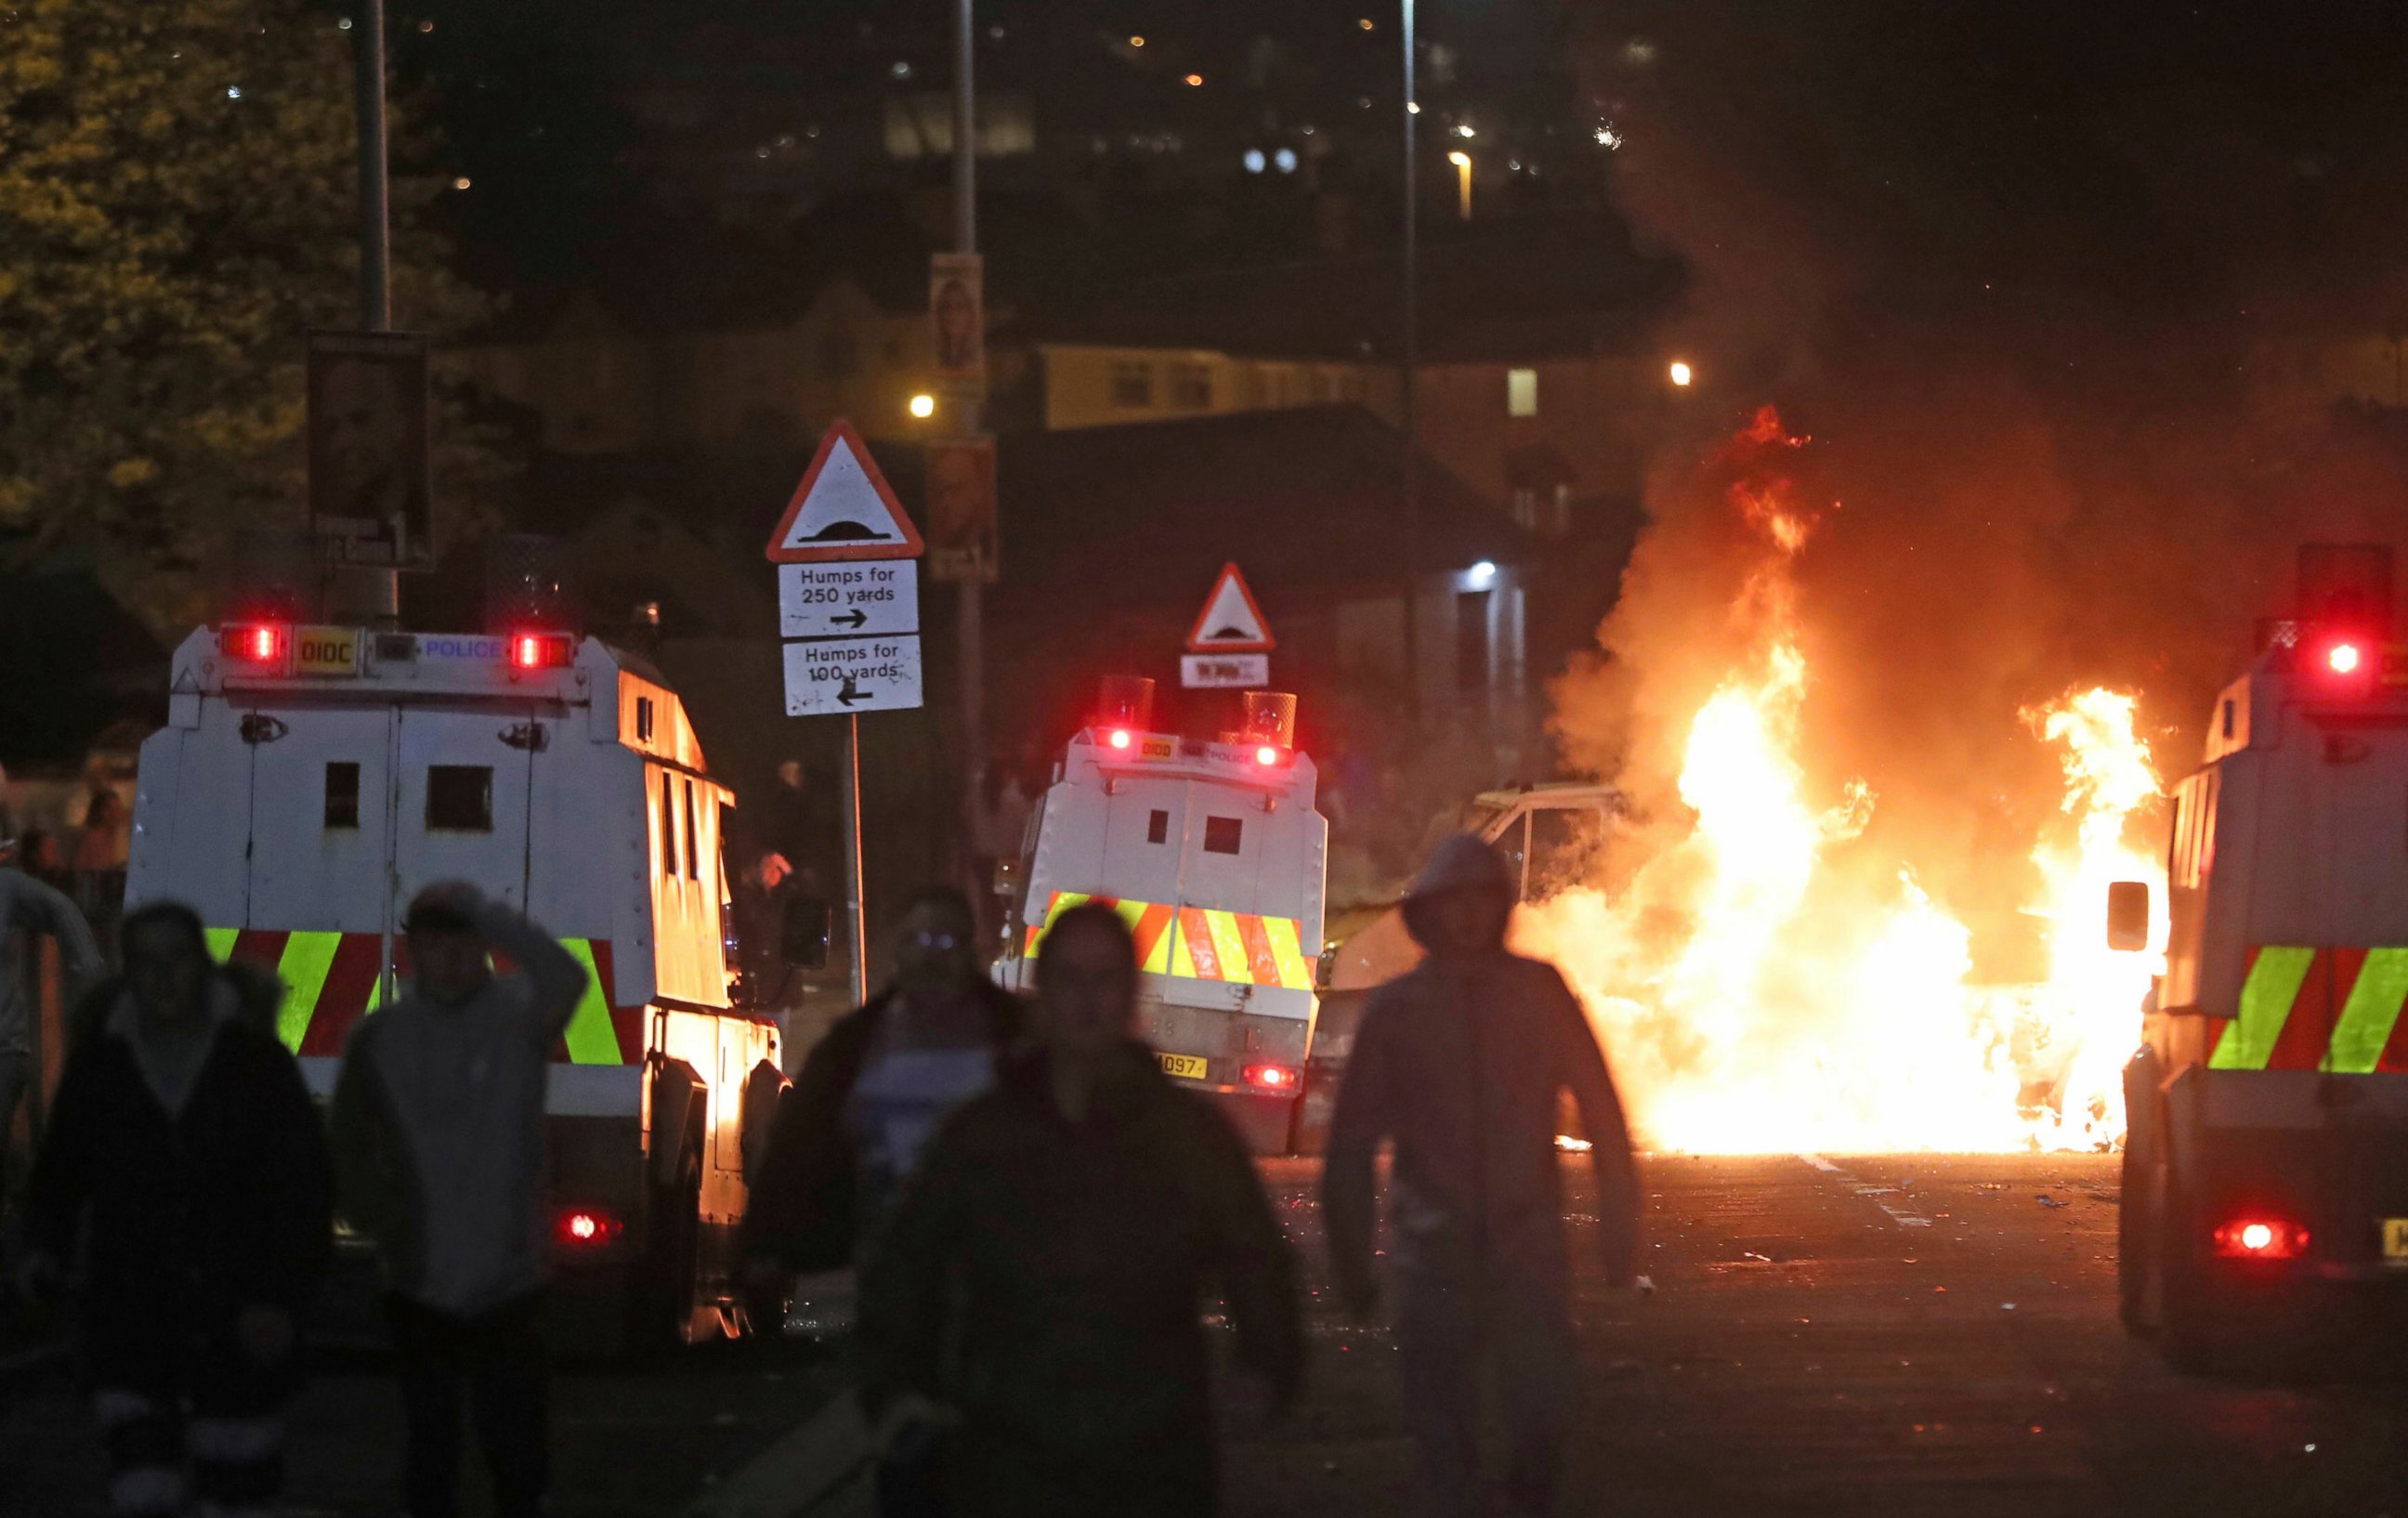 PHOTO: A car burns after petrol bombs were thrown at police in Creggan, Londonderry, in Northern Ireland, Thursday, April 18, 2019.